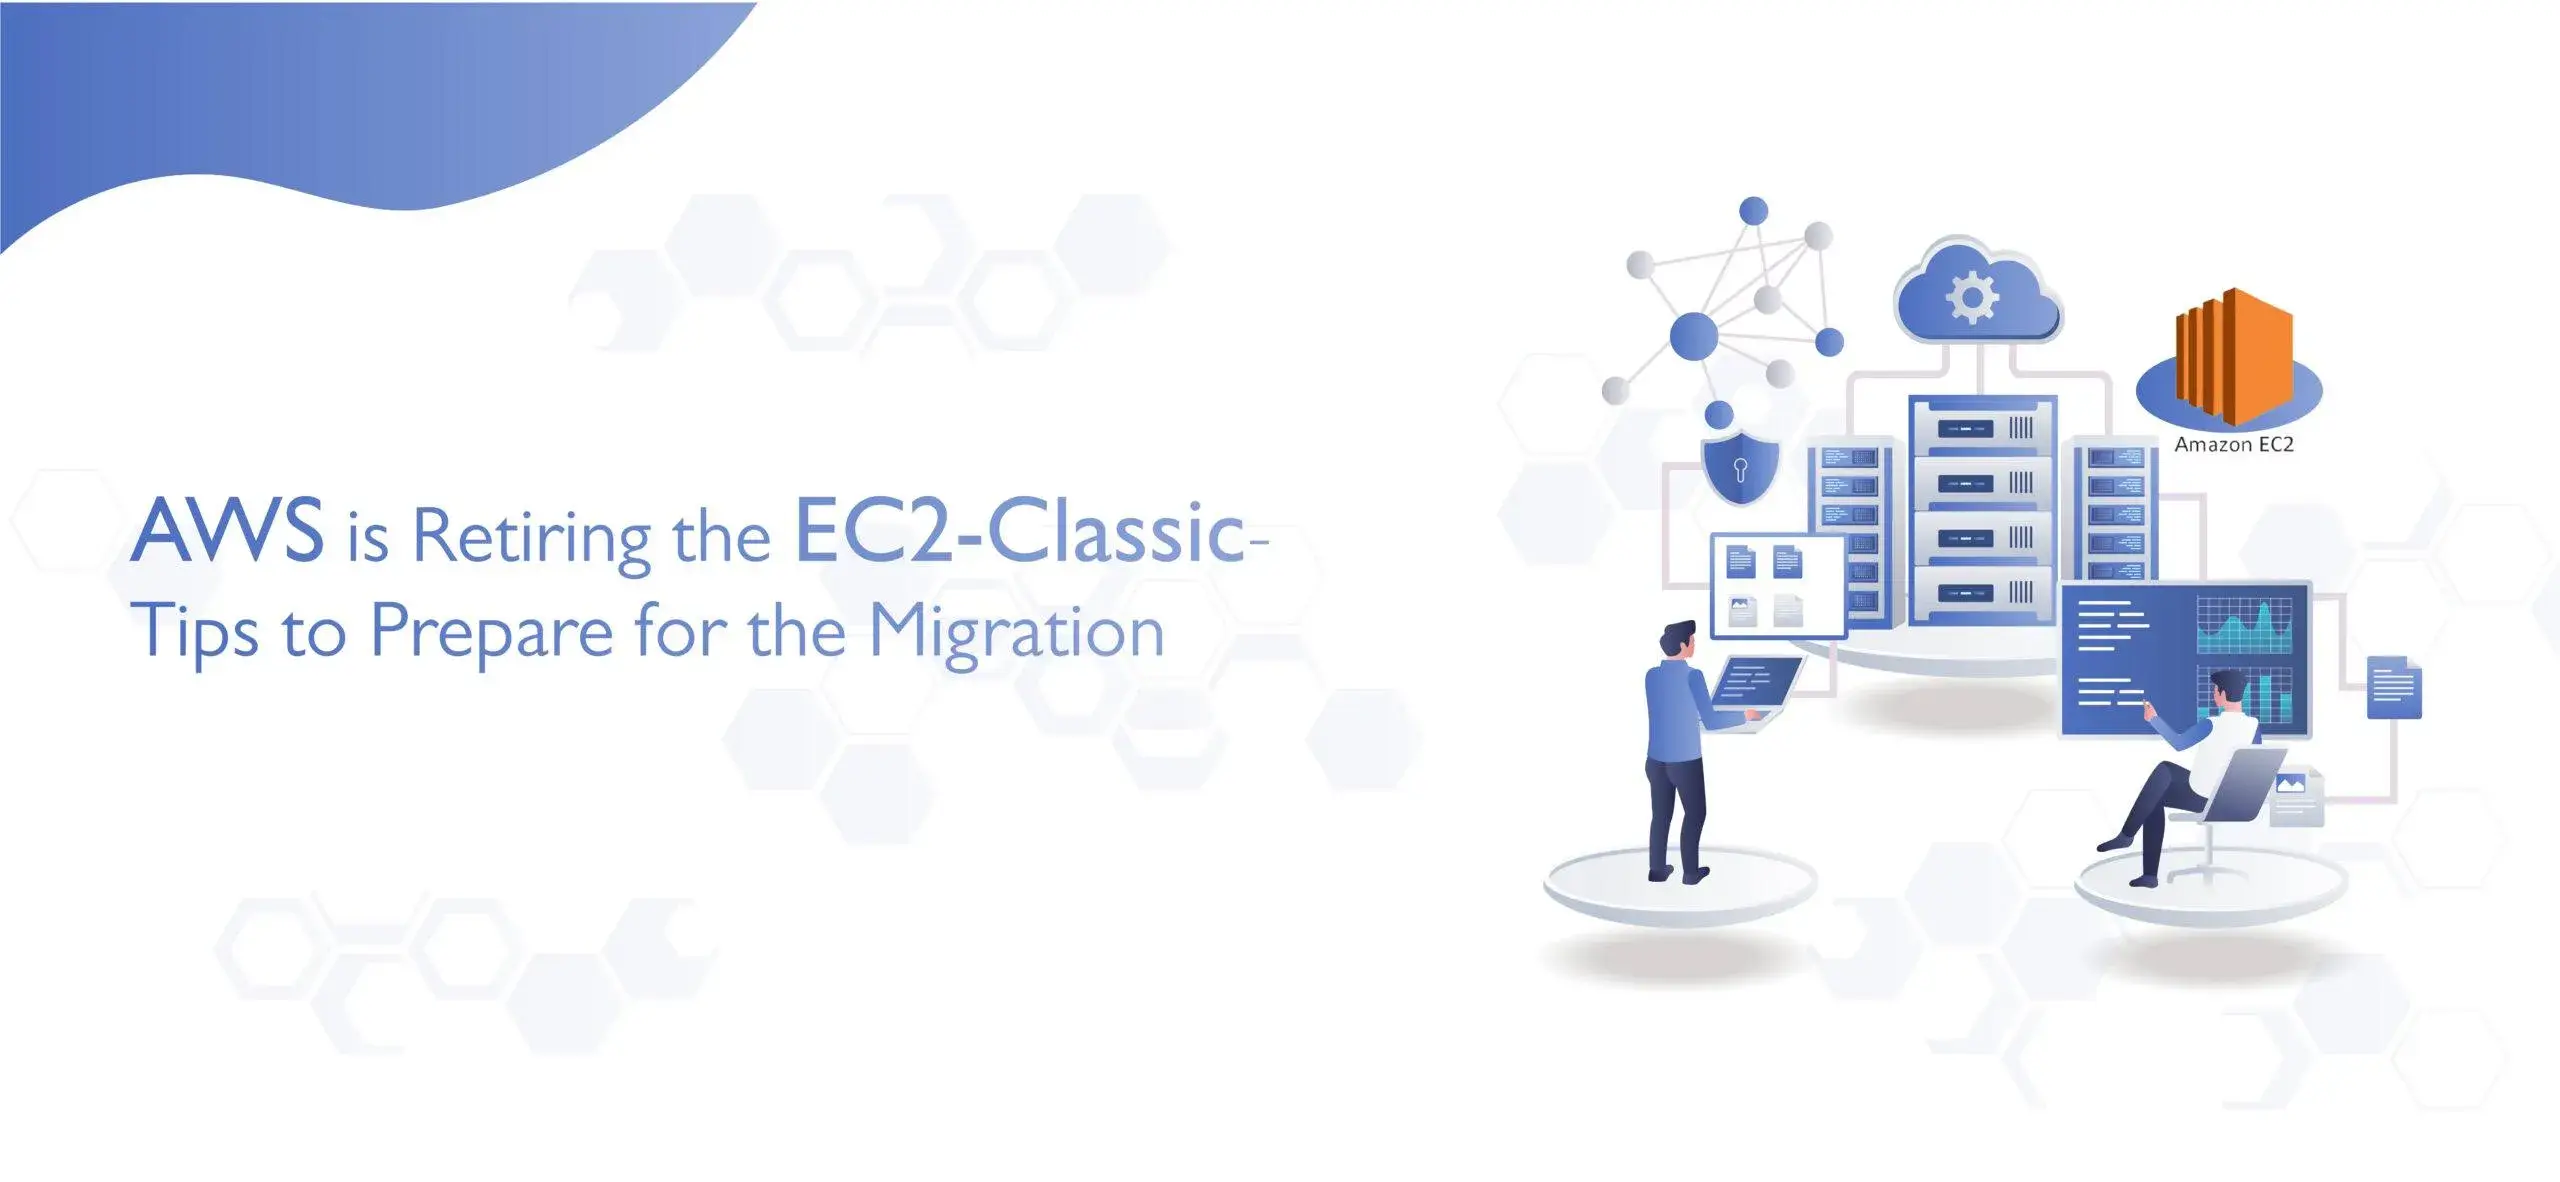 AWS is Retiring the EC2-Classic - Tips to Prepare for the Migration 